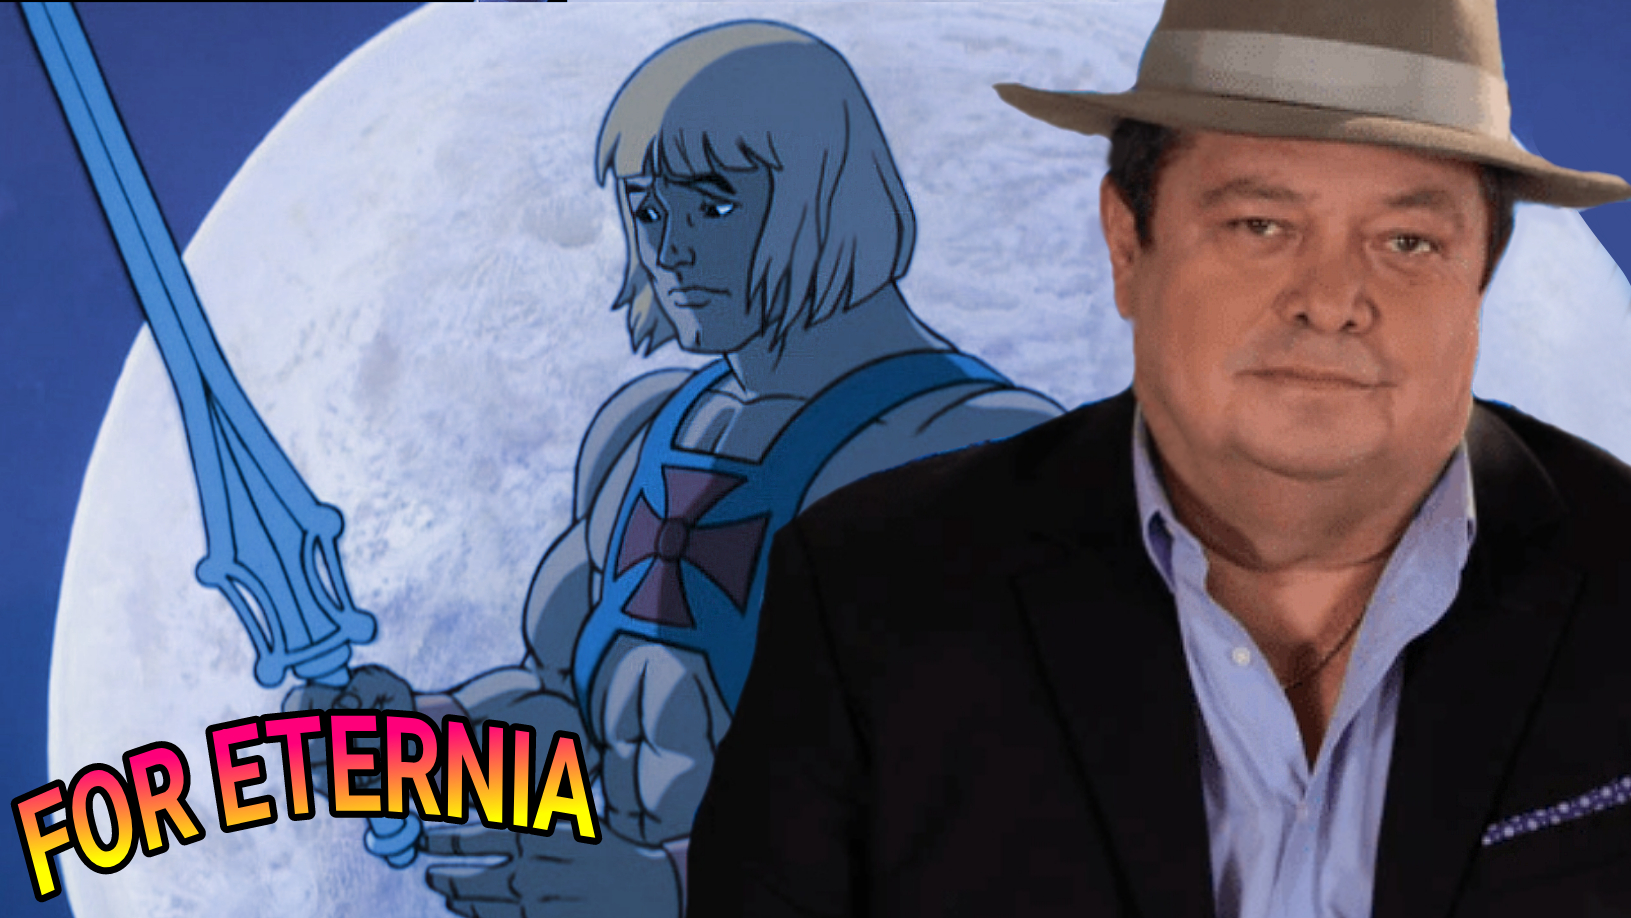 Rubén Moya, an iconic voice of He-Man, passes away at age 62.